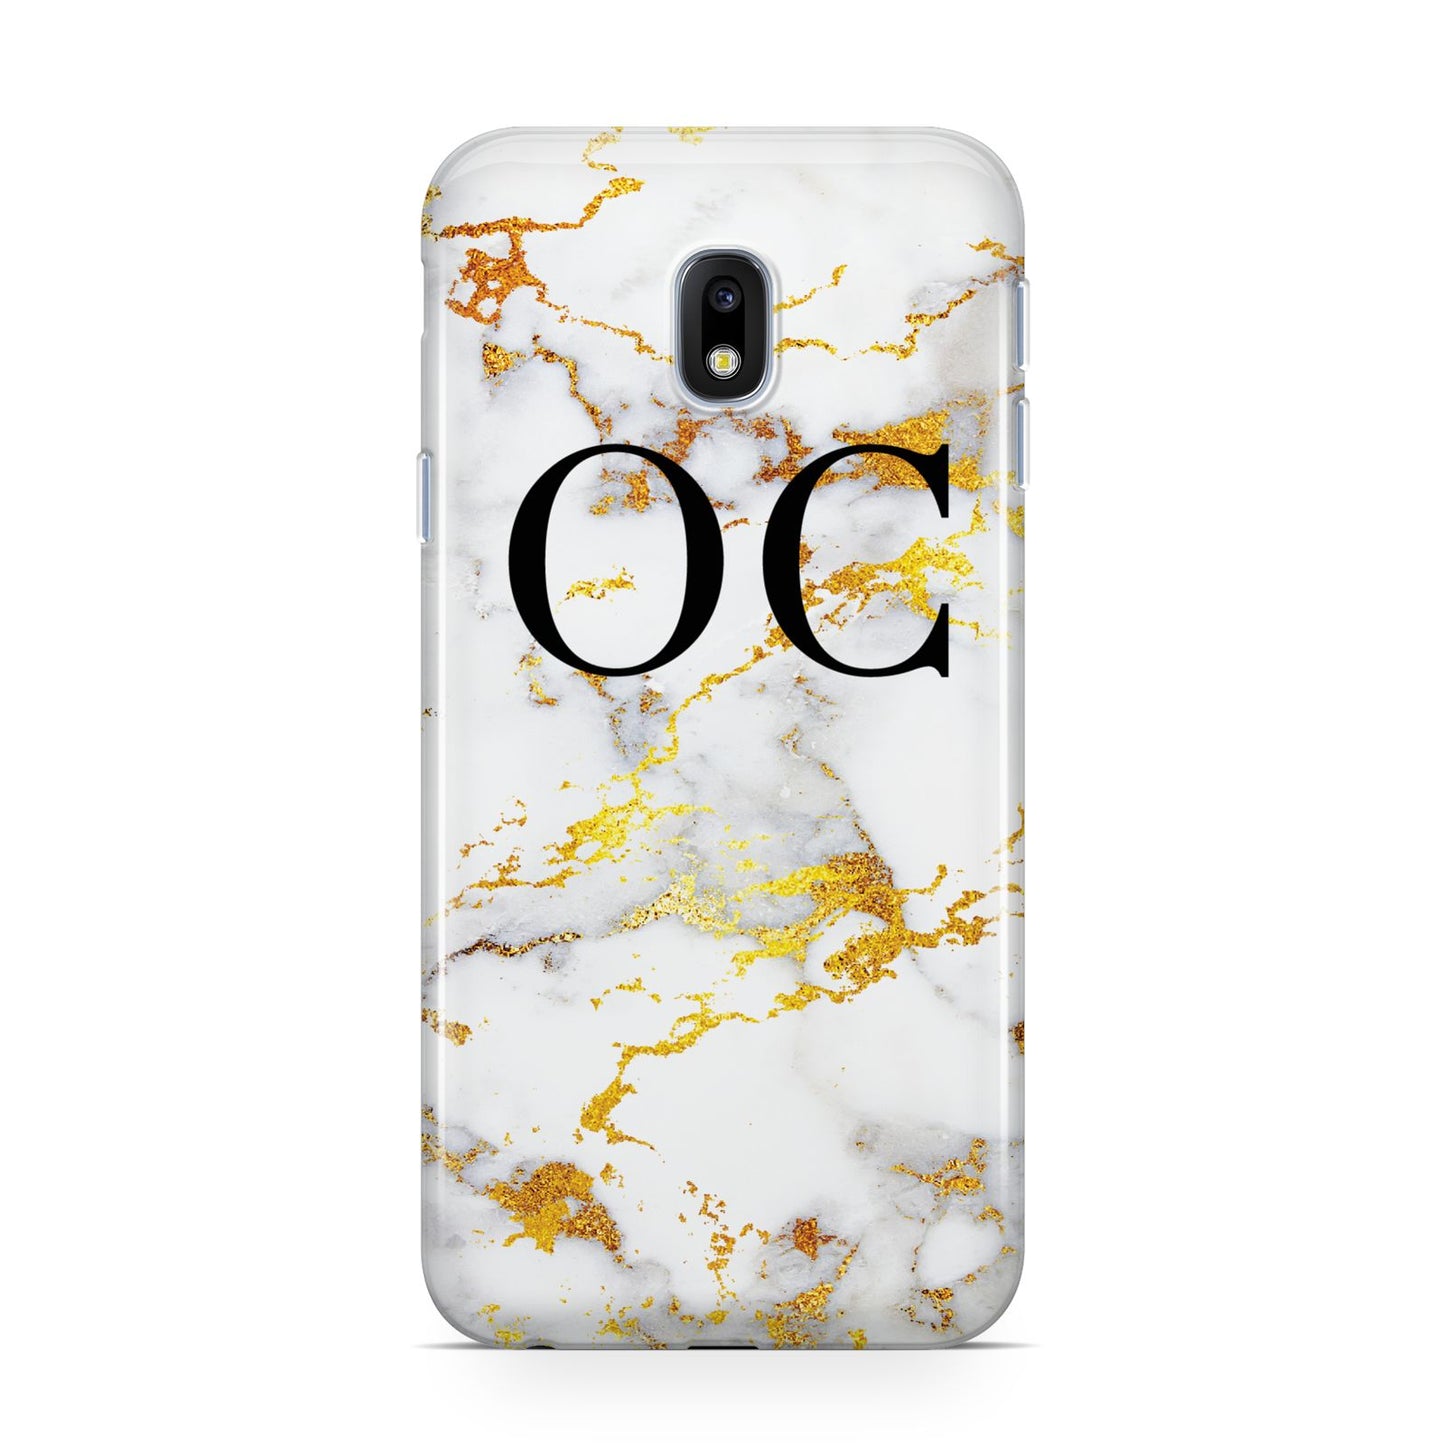 Personalised Gold Marble Initials Monogram Samsung Galaxy J3 2017 Case